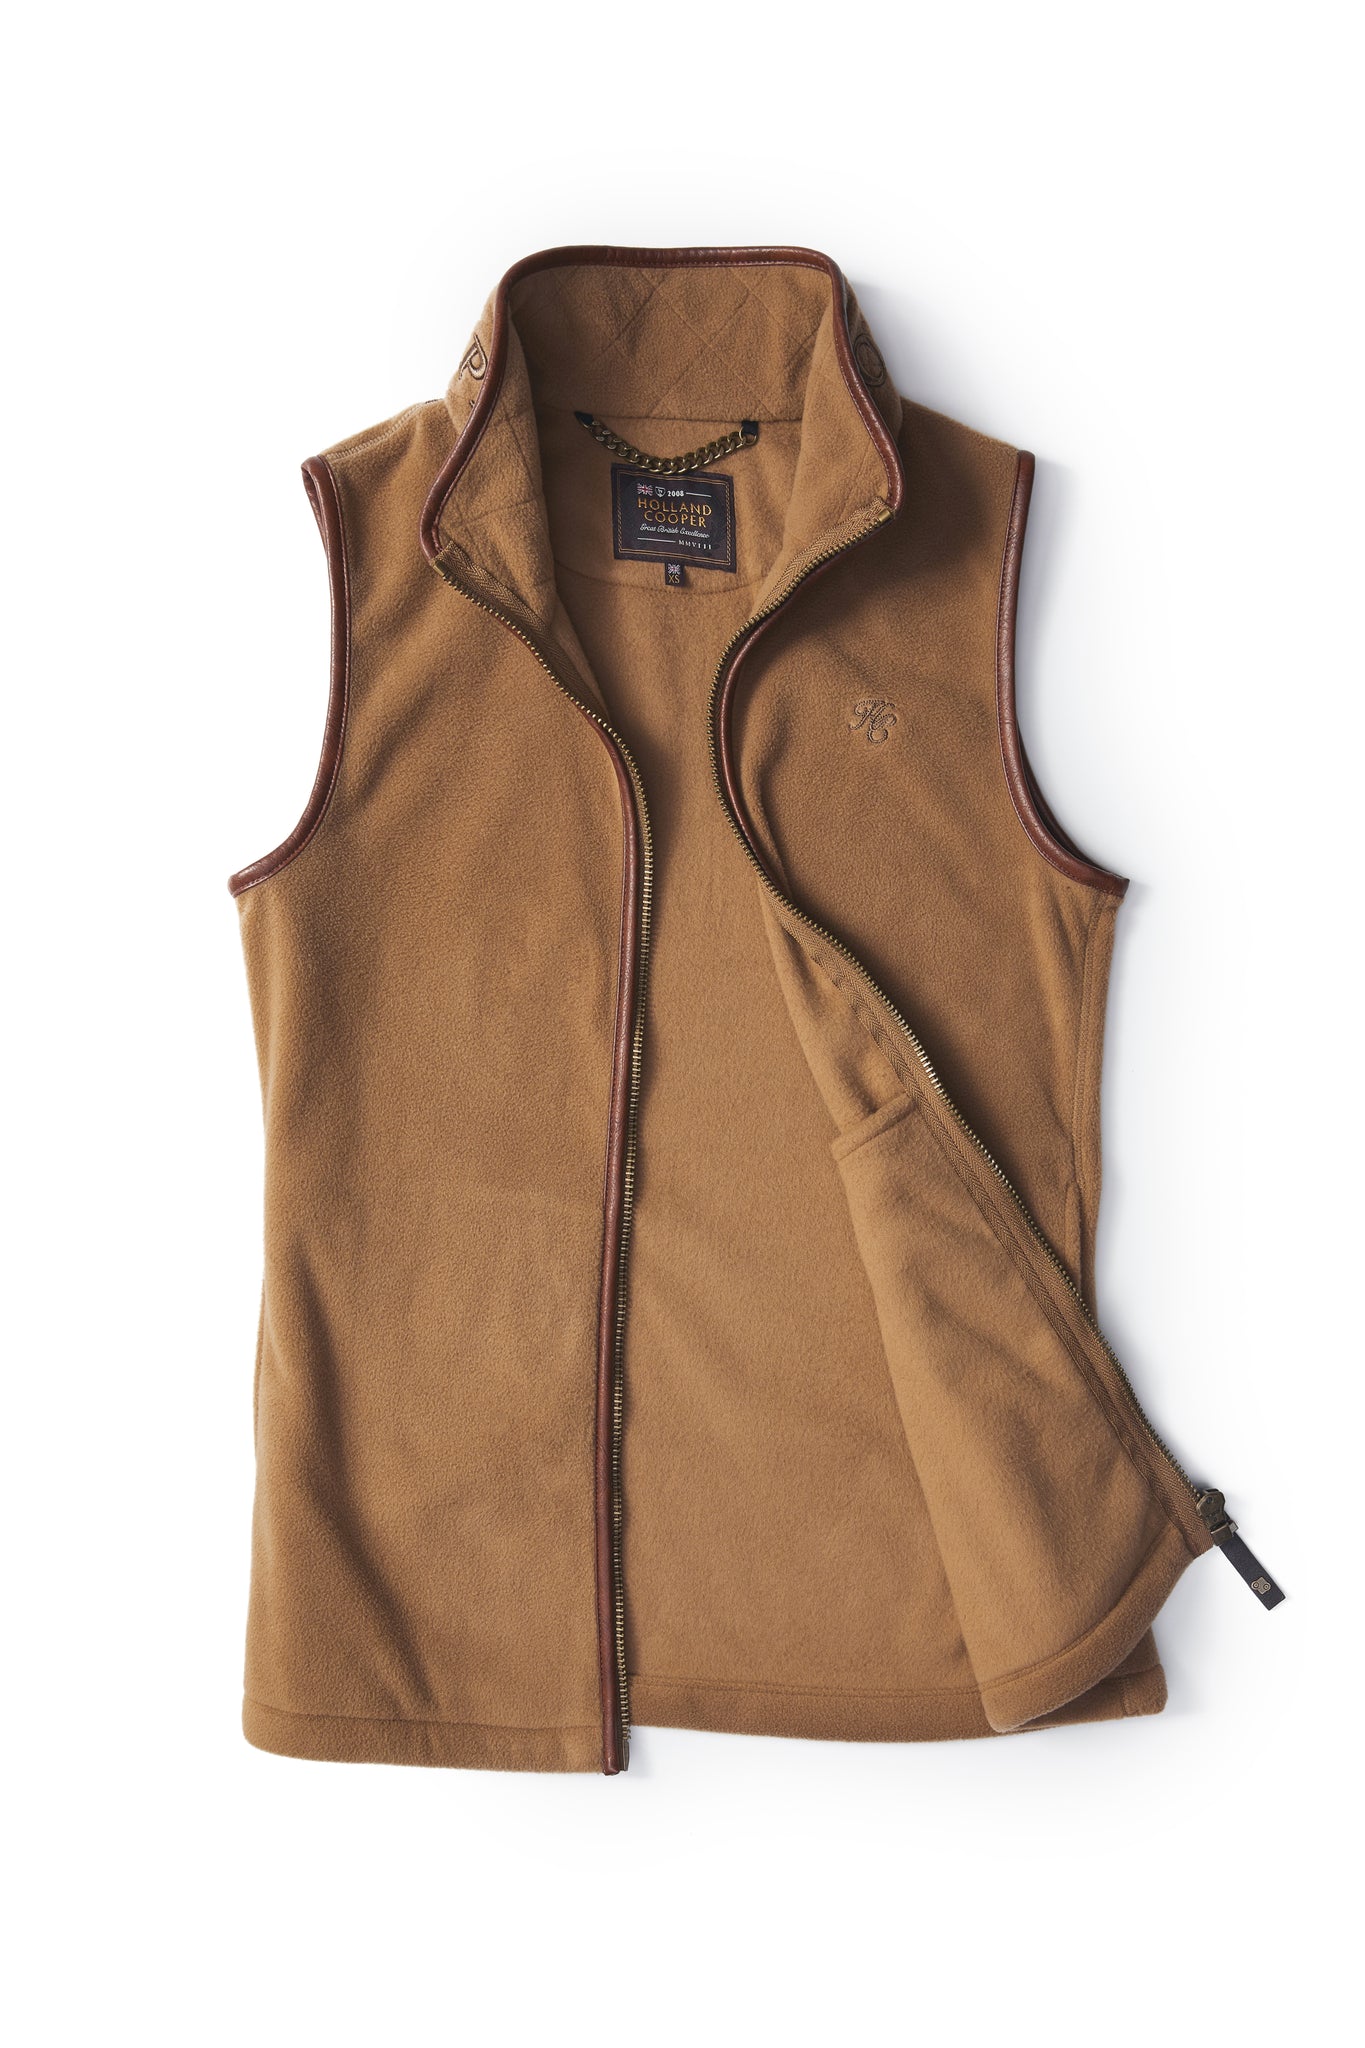 womens fleece gilet in light brown with dark brown leather piping around armholes neckline and down the front zip fastening